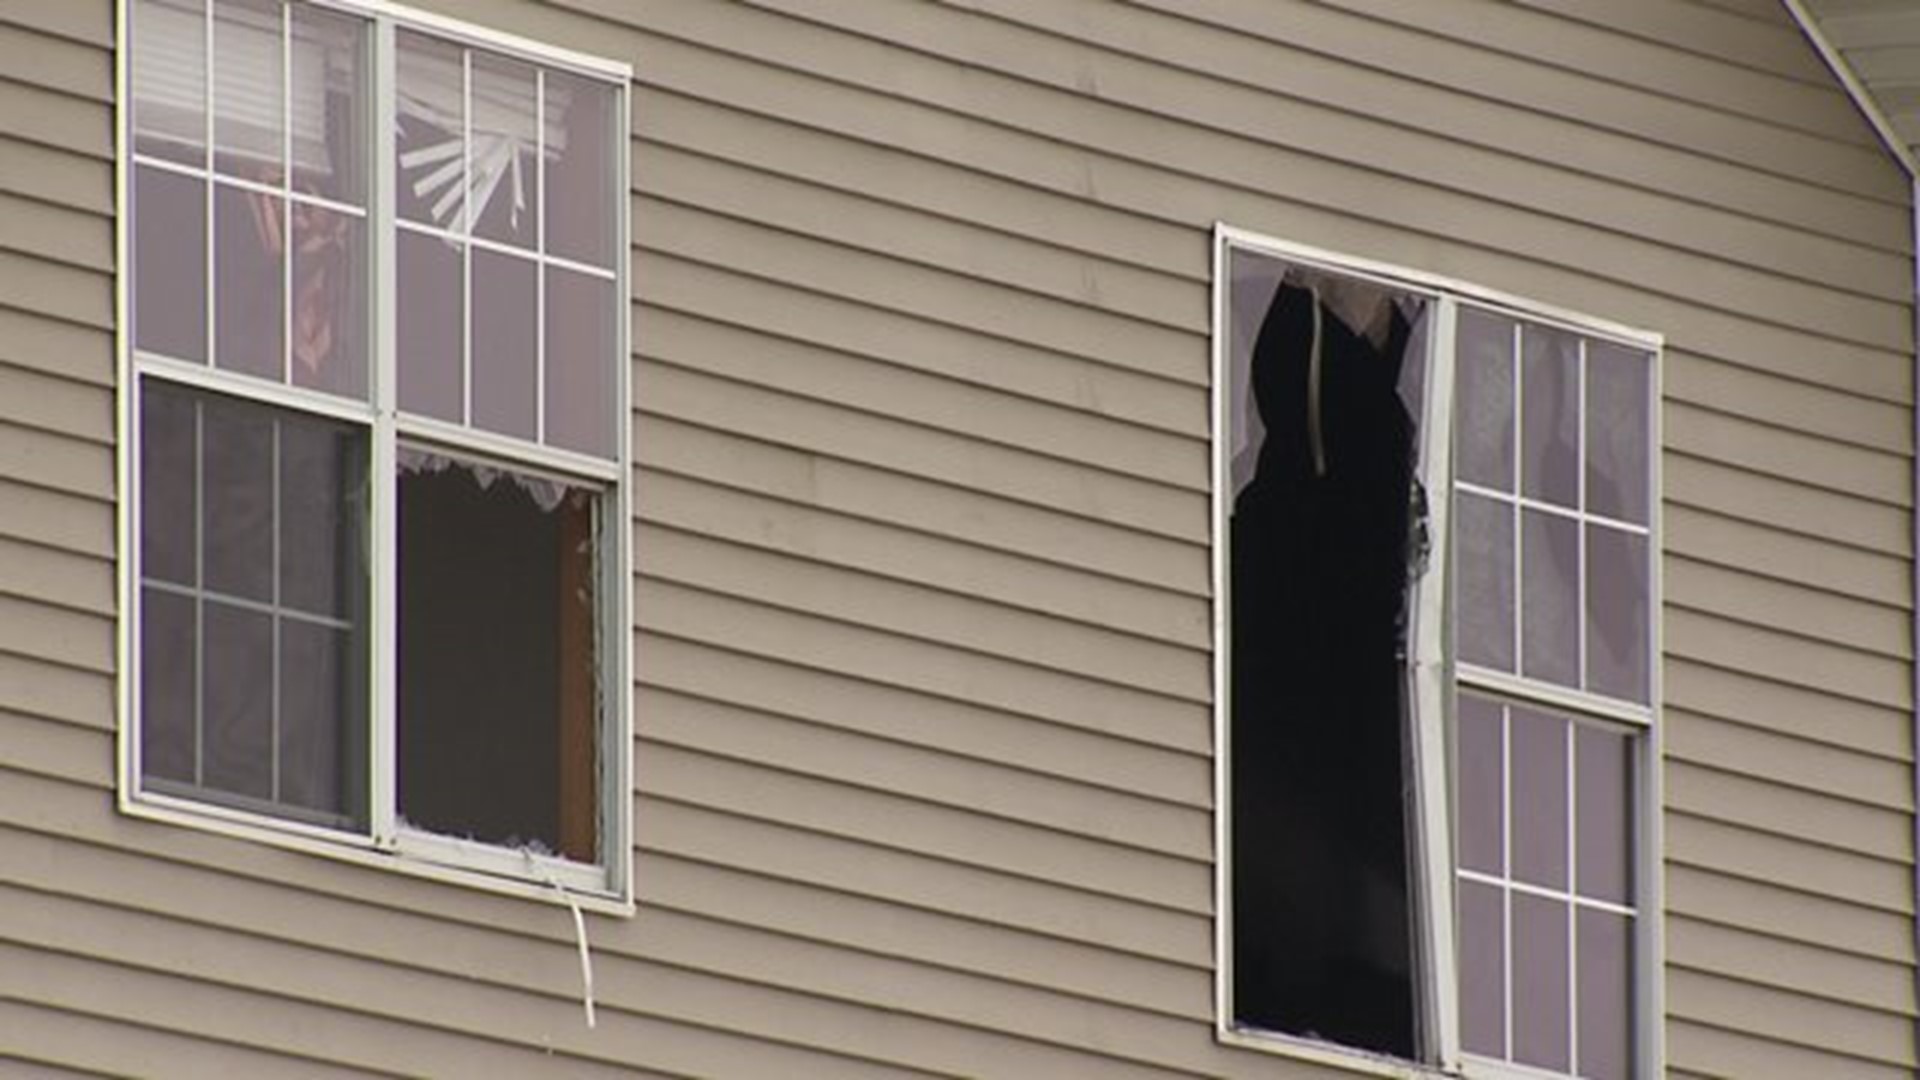 Kewanee apartment fire leaves several families homeless